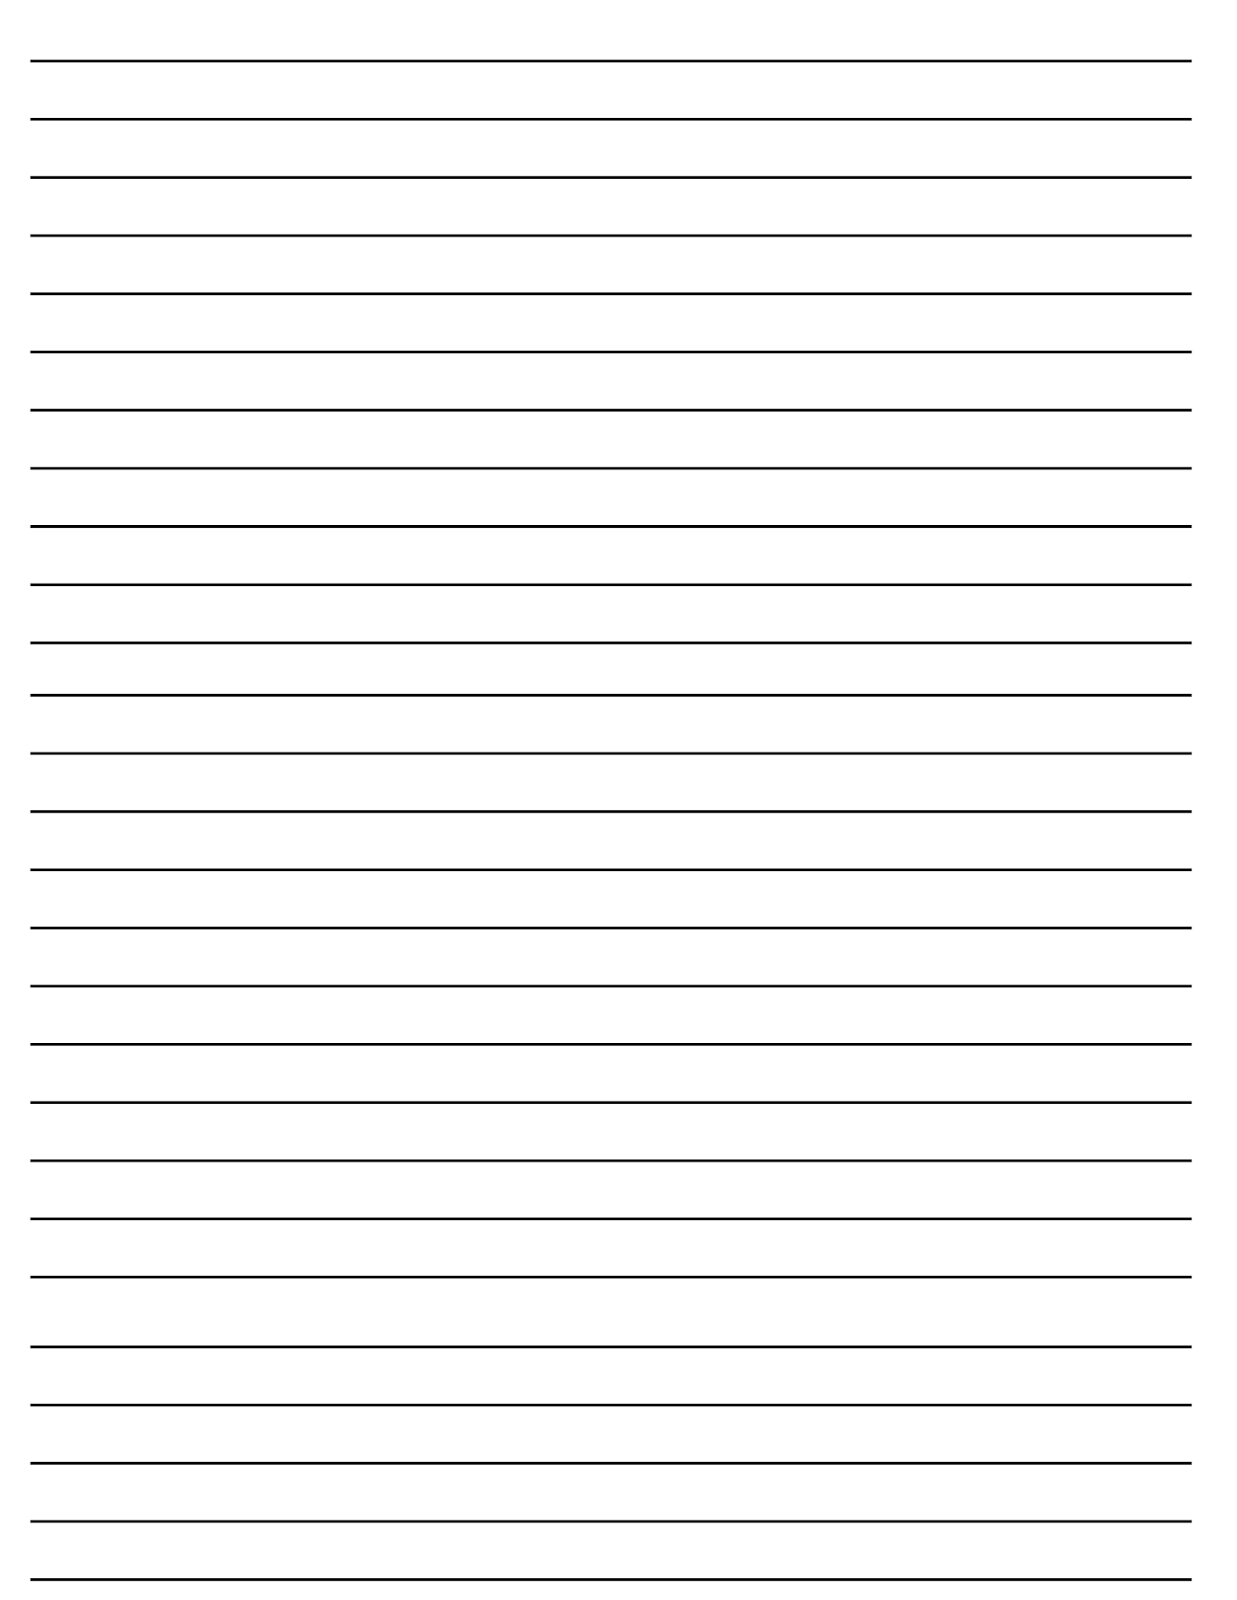 5 Best Images of 5th Grade Writing Paper Printable - 3rd Grade Lined ...